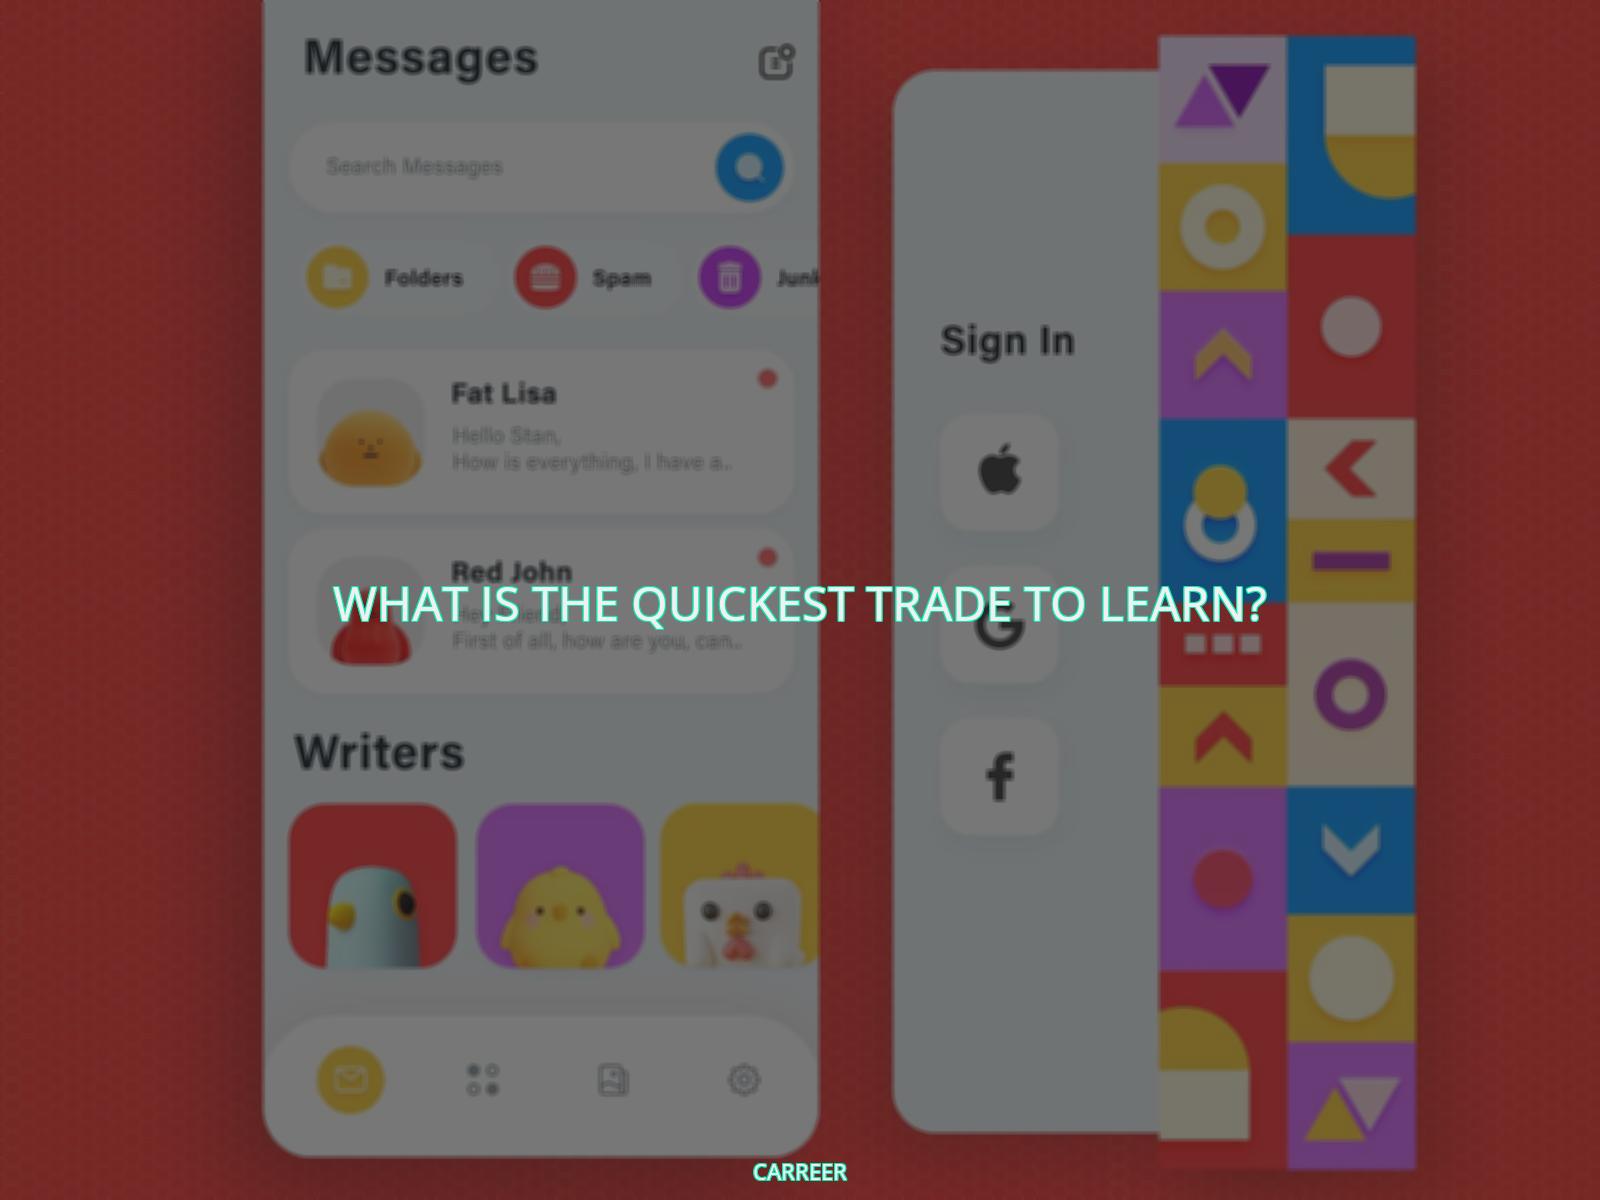 What is the quickest trade to learn?